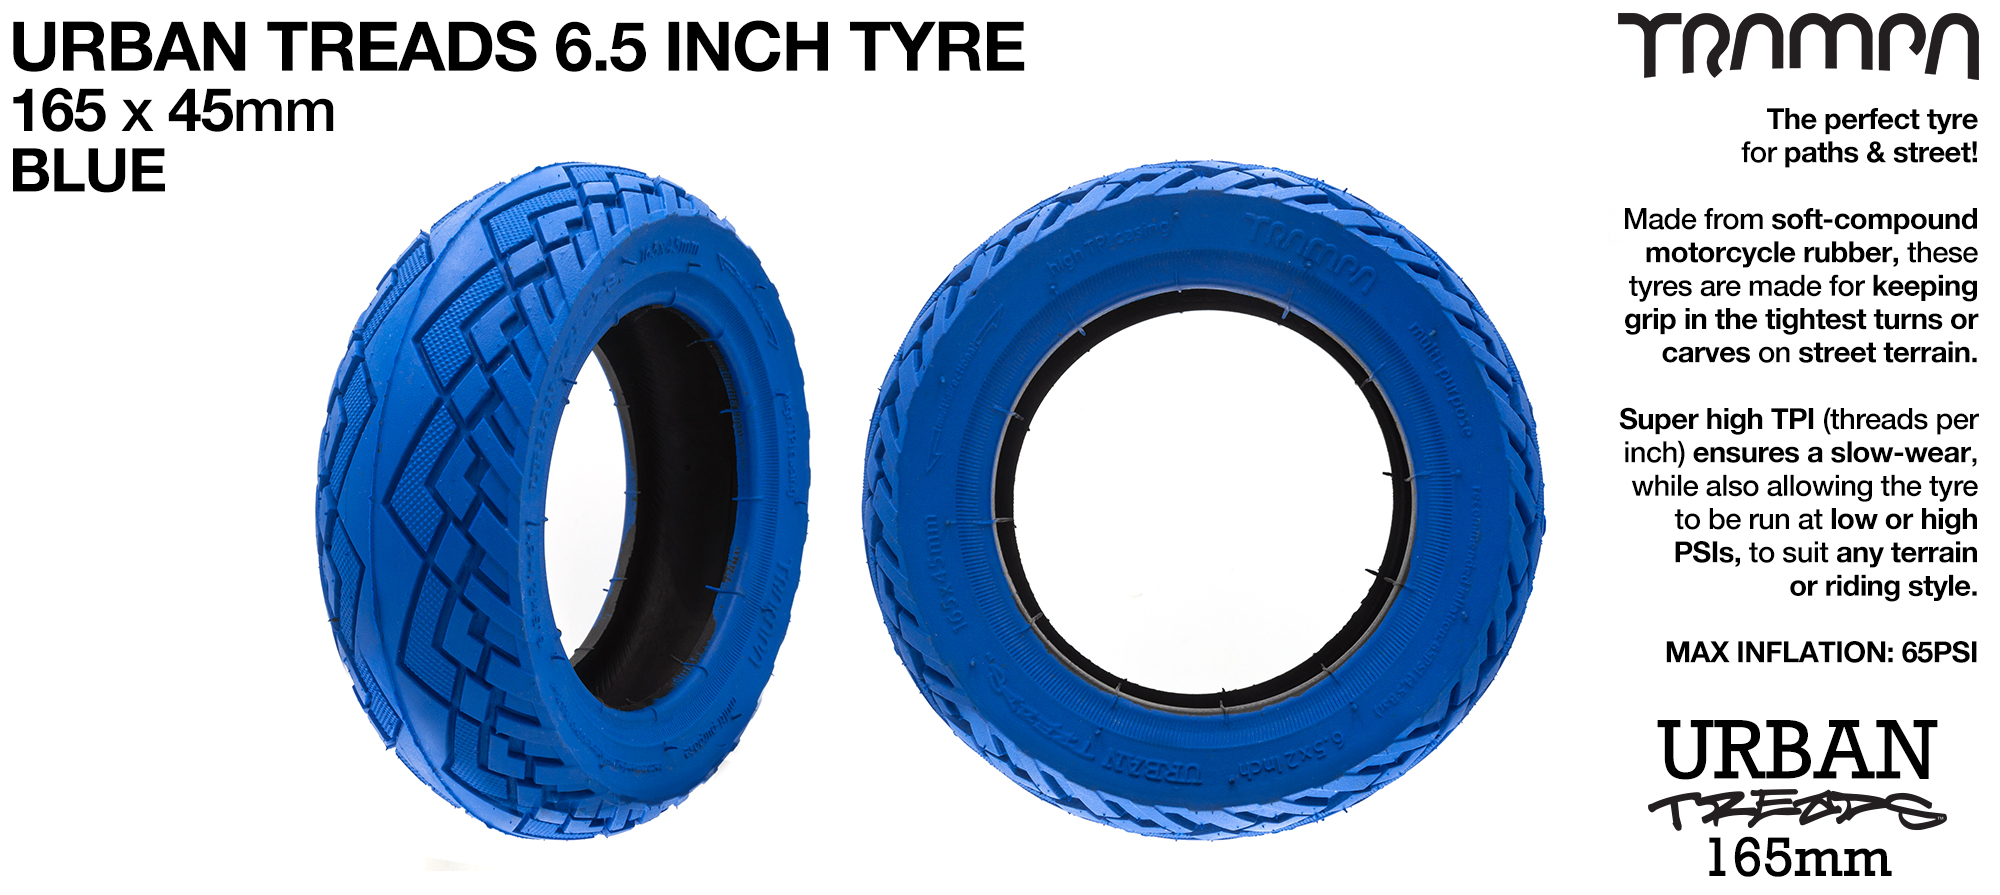 URBAN TREADS 6 Inch Tyre measures 3.75x 1.75x 6.5 Inch or 165x 45mm with 3.75 inch Rim & fits all 3.75 inch Hubs - BLUE 